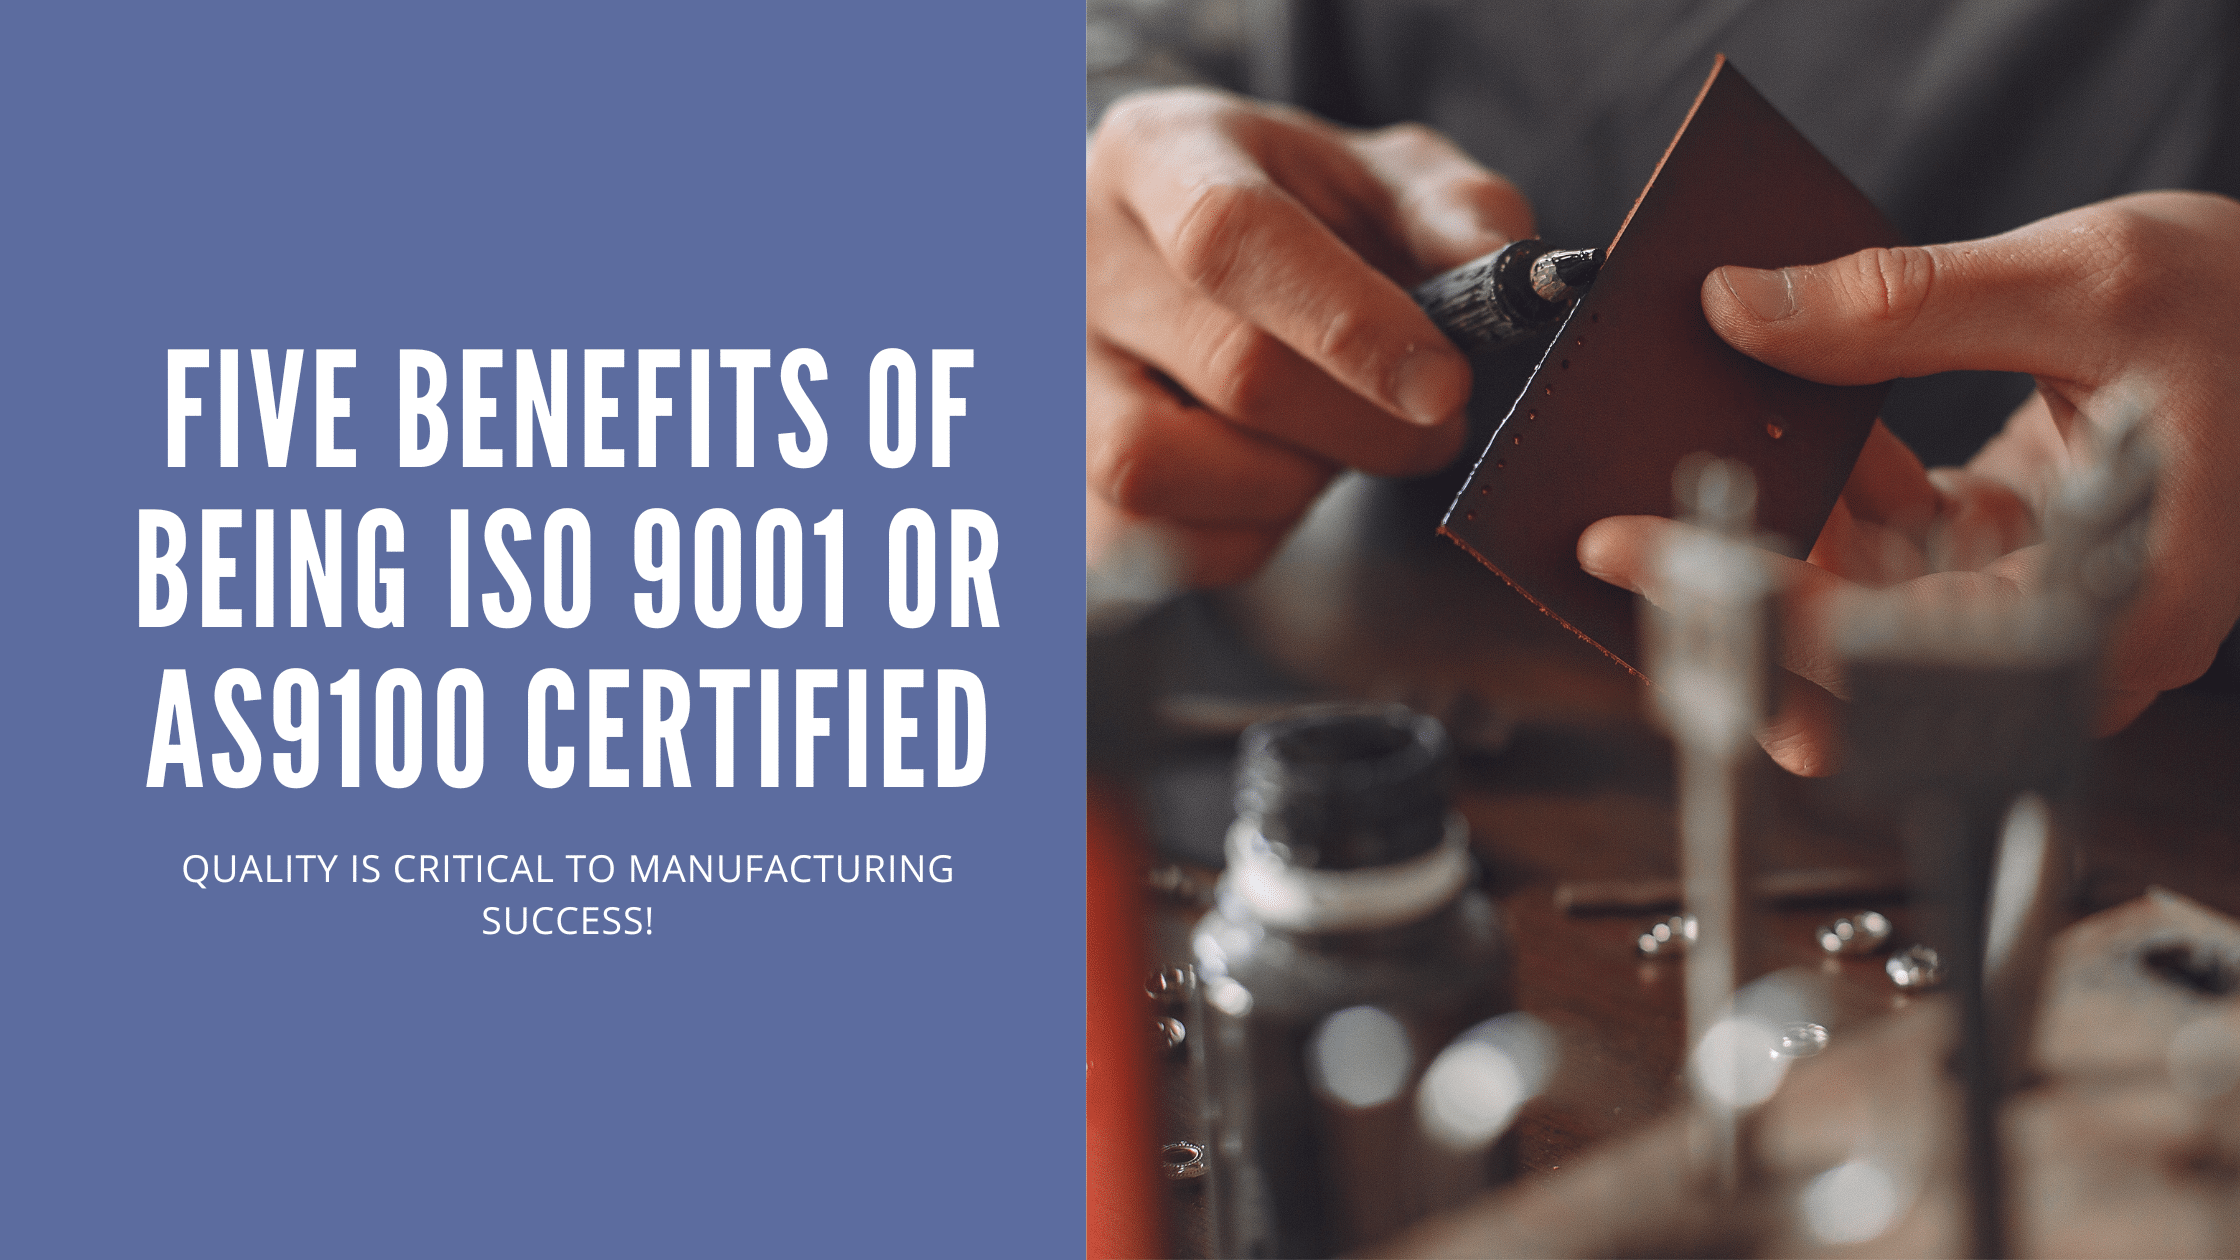 Five Benefits of AS9100 Certification